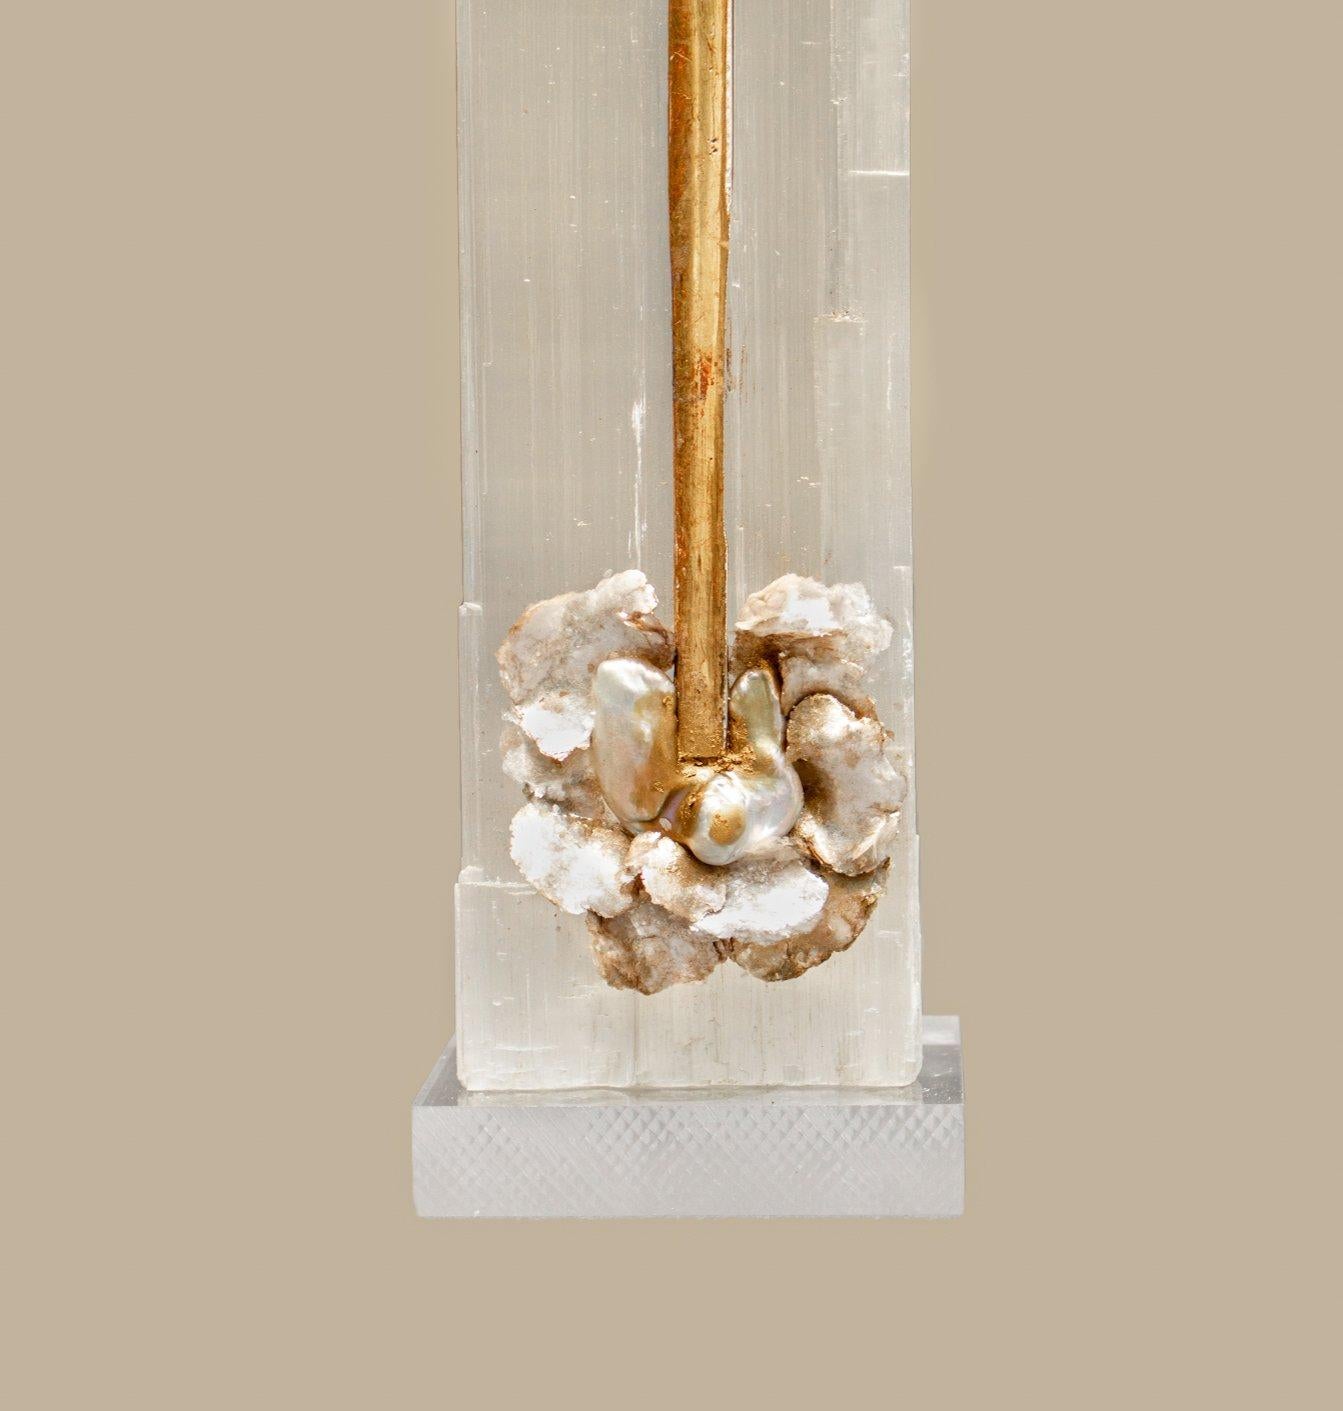 Ruler Selenite with an 18th century Italian gold leaf fragment sunray, mica, and natural forming baroque pearls on a lucite base. Ruler selenite or 